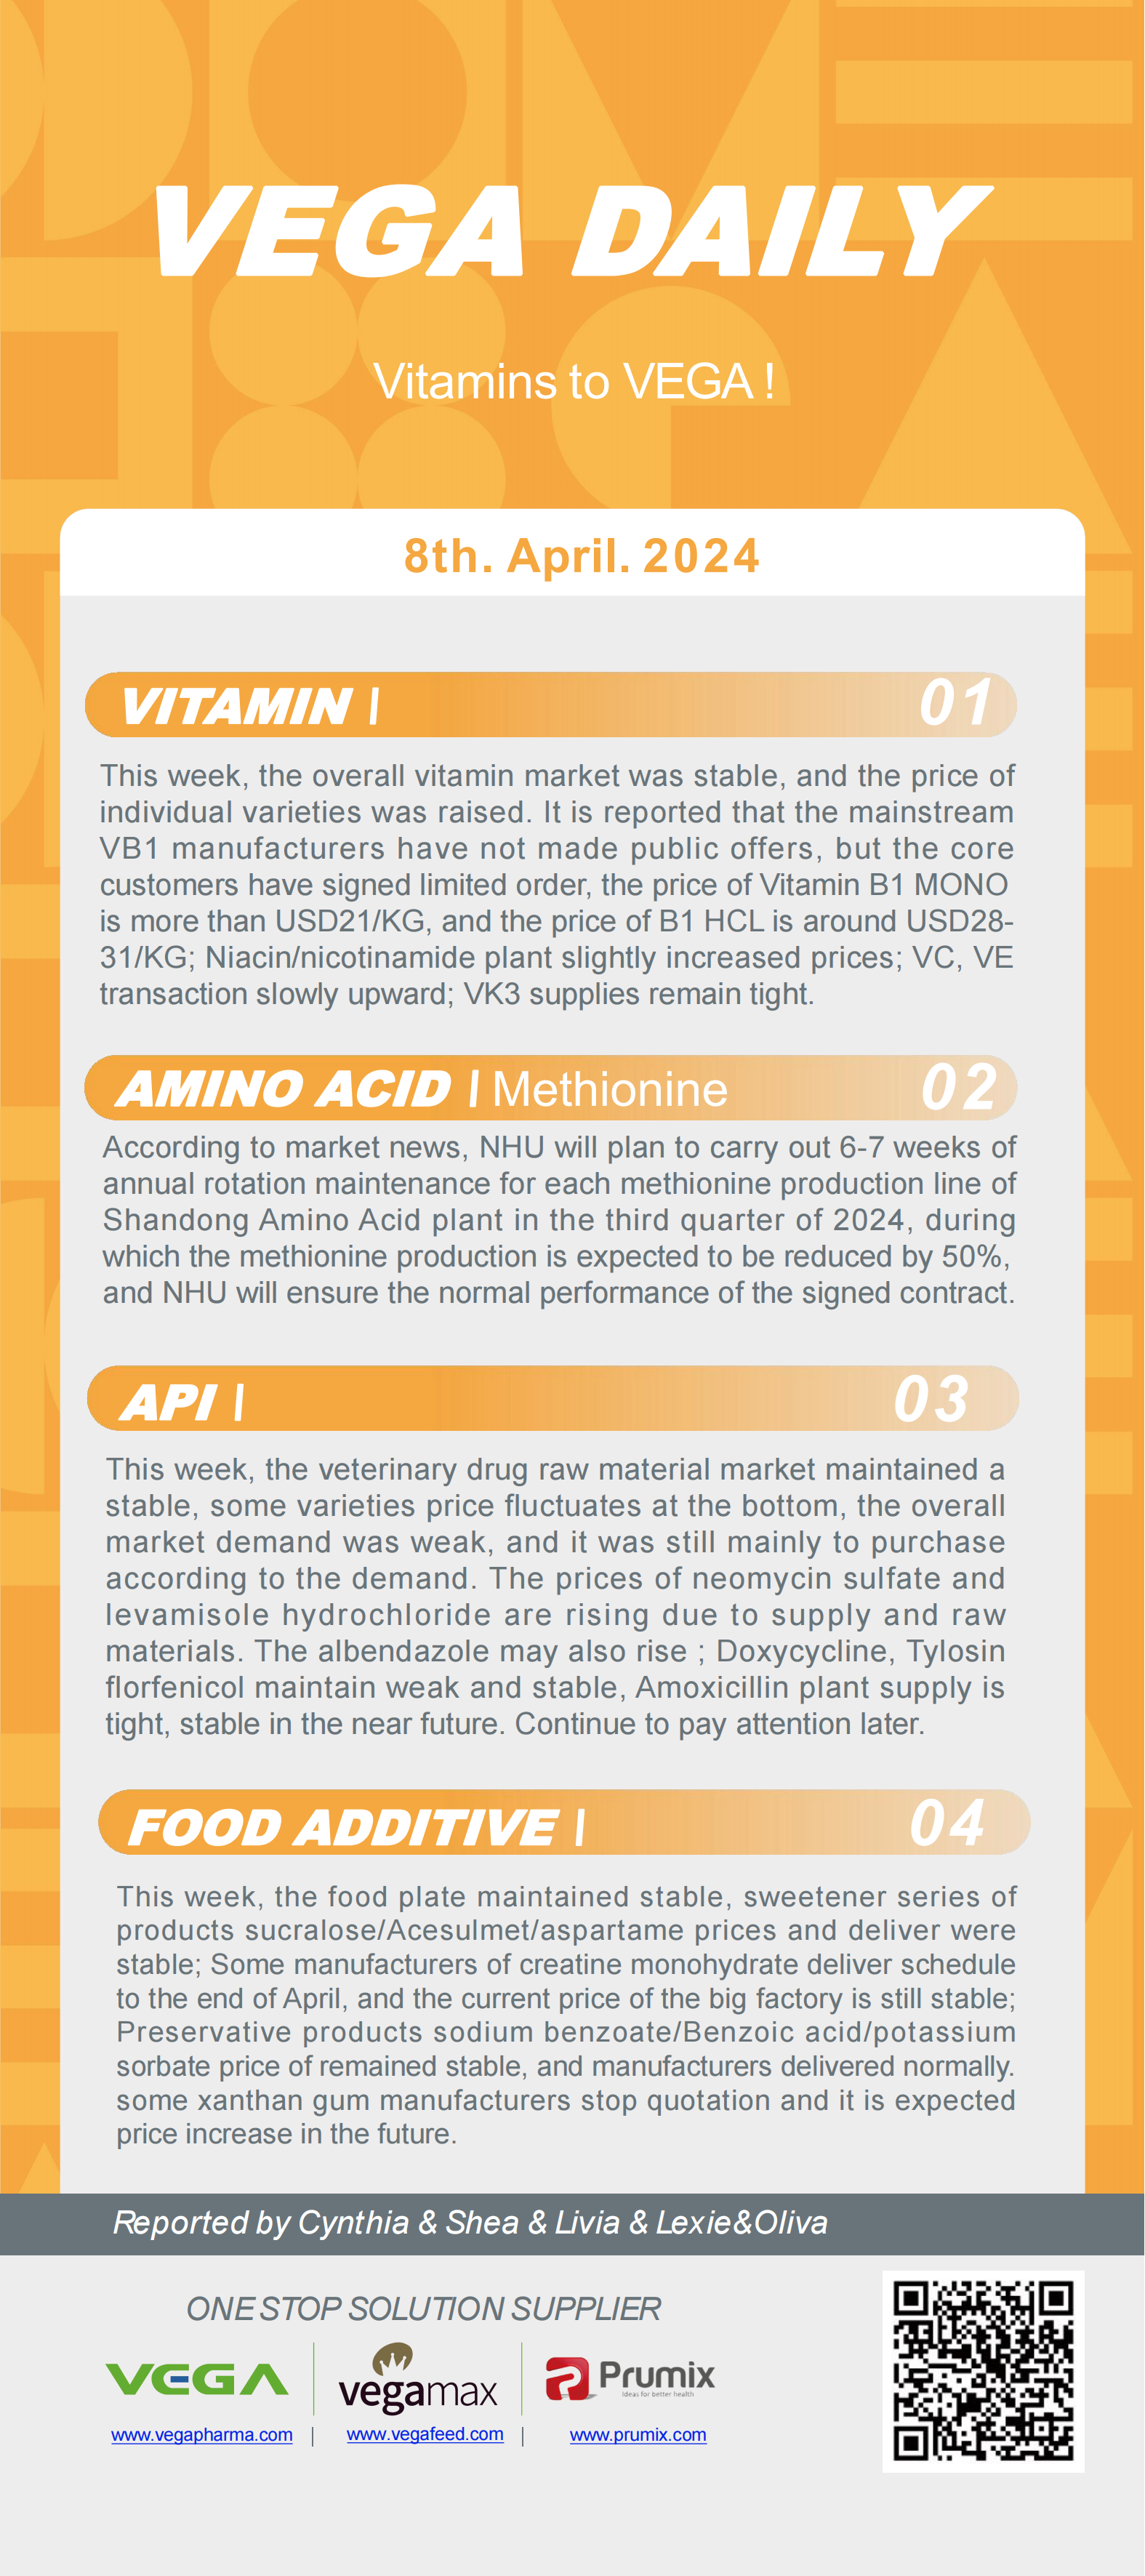 Vega Daily Dated on Apr 8th 2024 Vitamin Amino Acid APl Food Additives.png